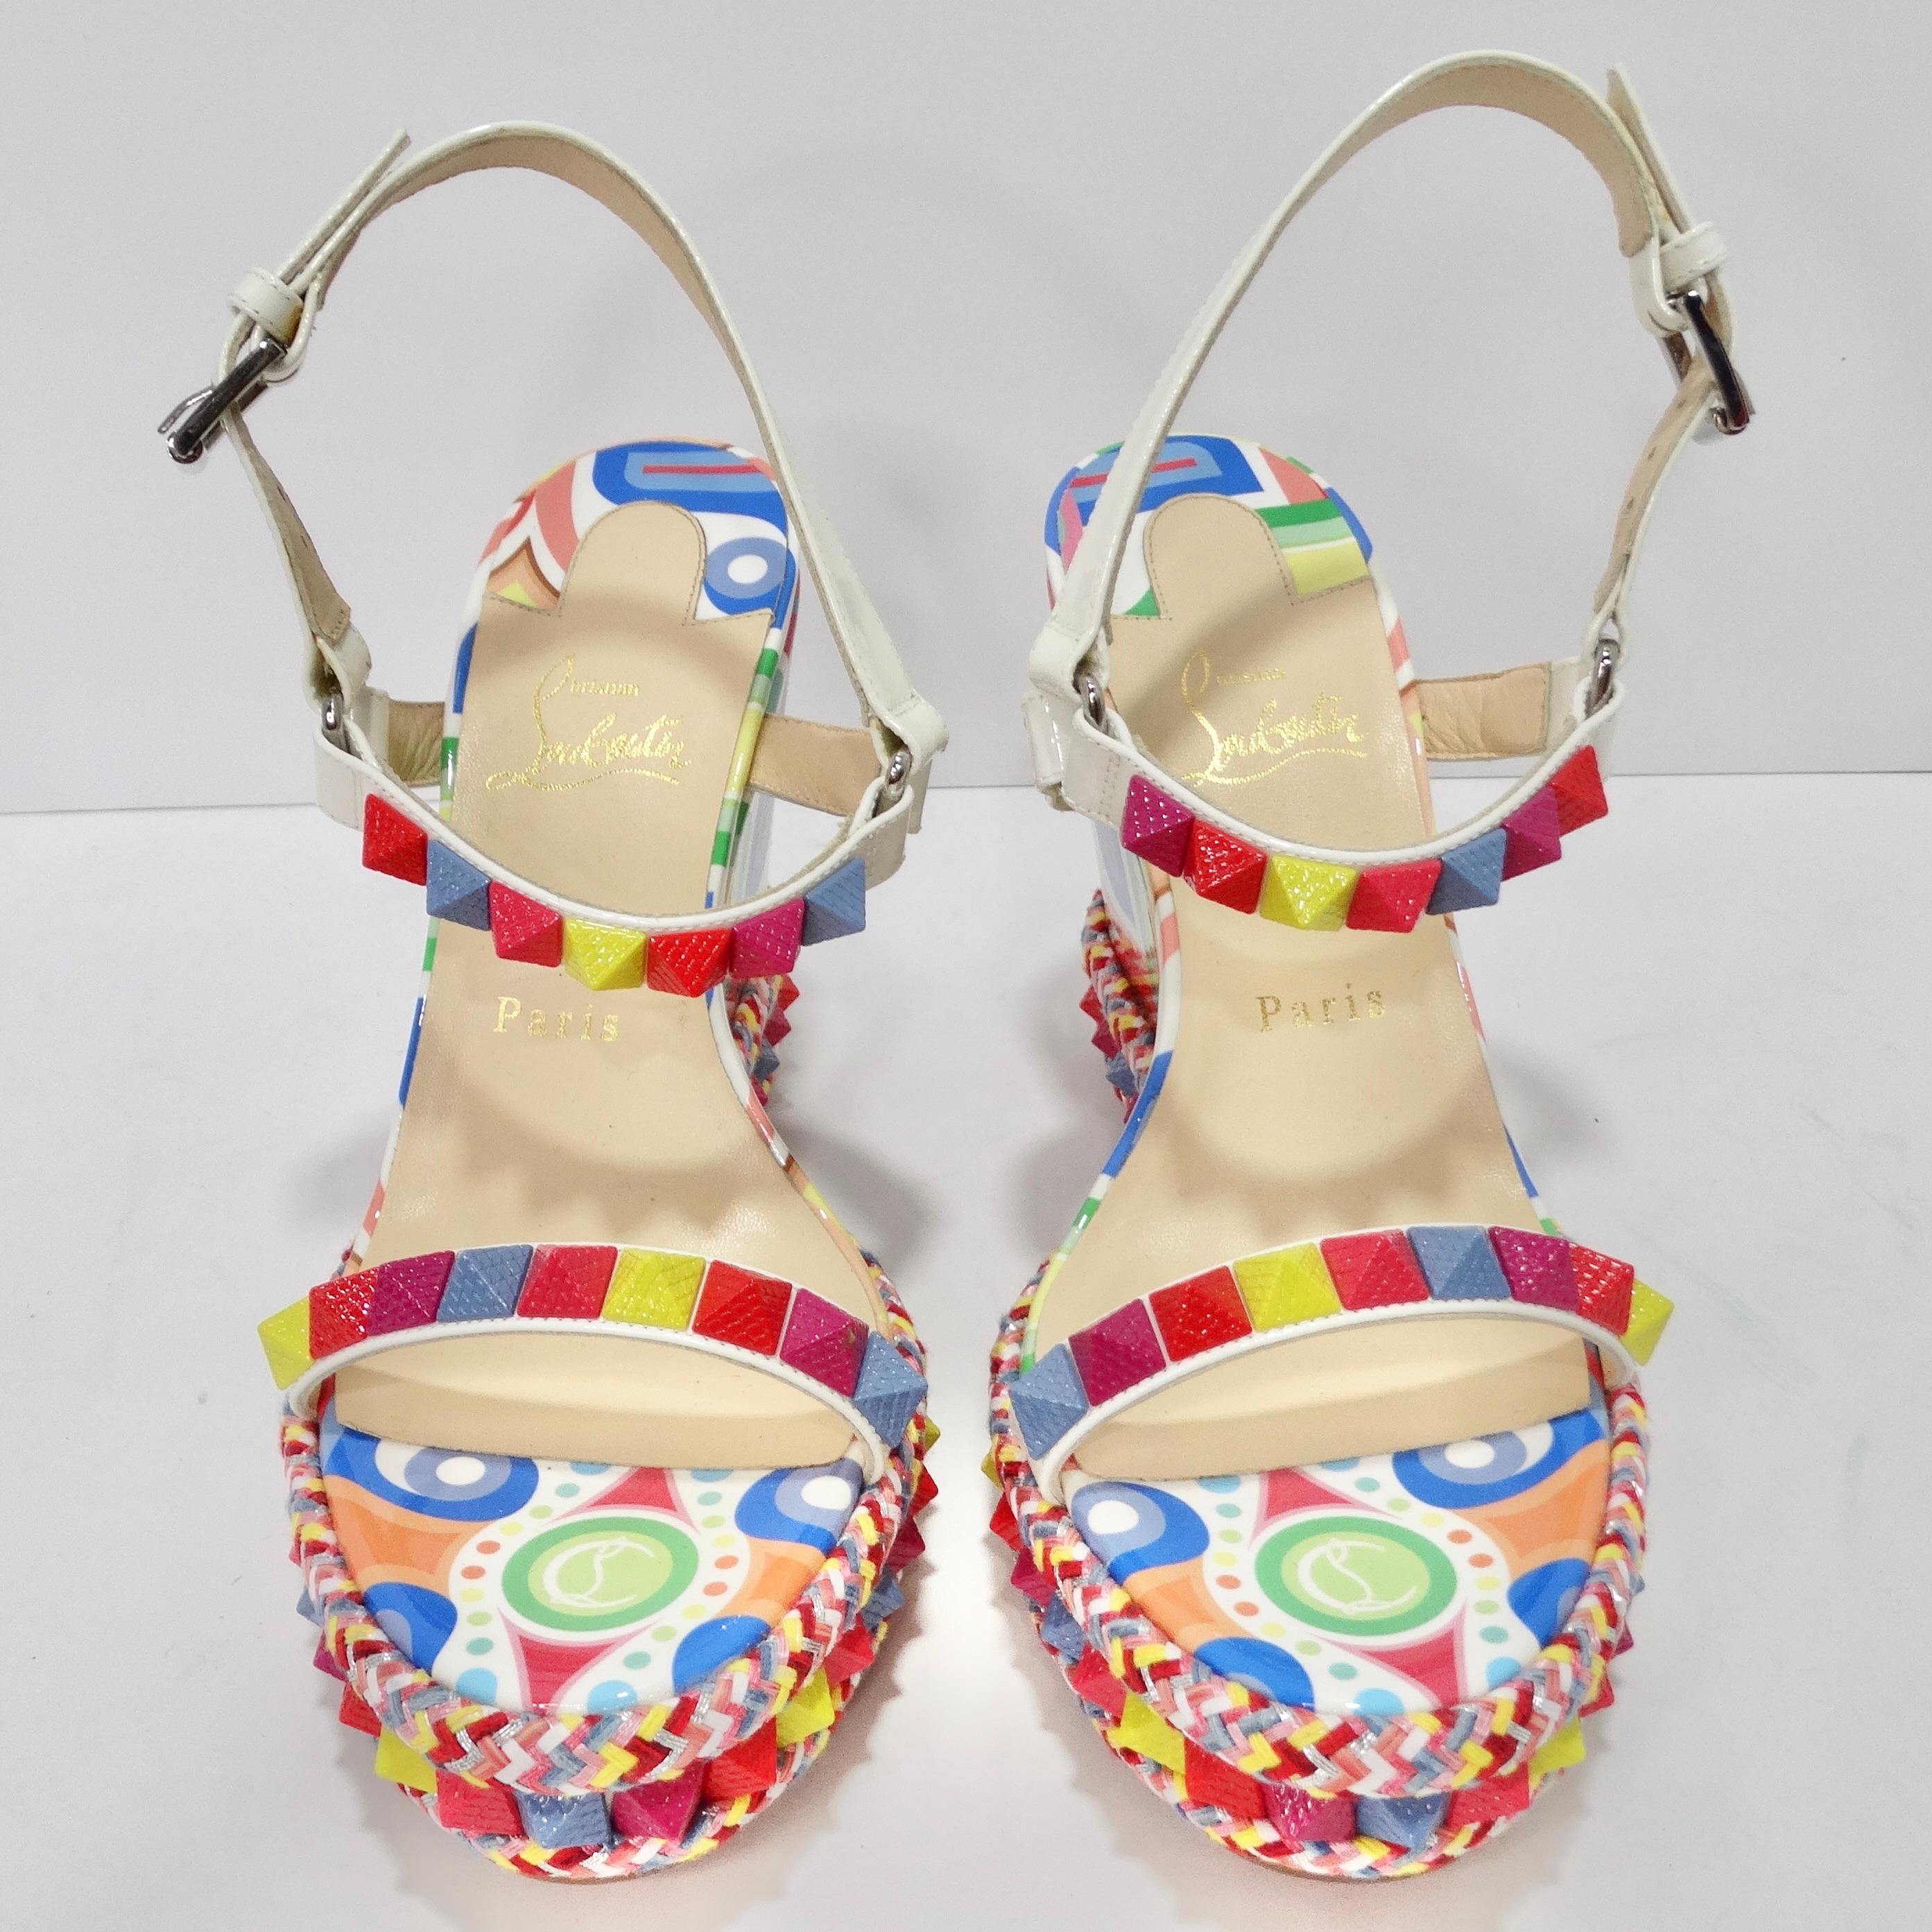 Introducing the Christian Louboutin Multicolor Printed Stud Wedges - a kaleidoscope of style, creativity, and playful charm. These wedges are the epitome of eye-catching, vibrant fashion that's perfect for those who appreciate a bold and unique